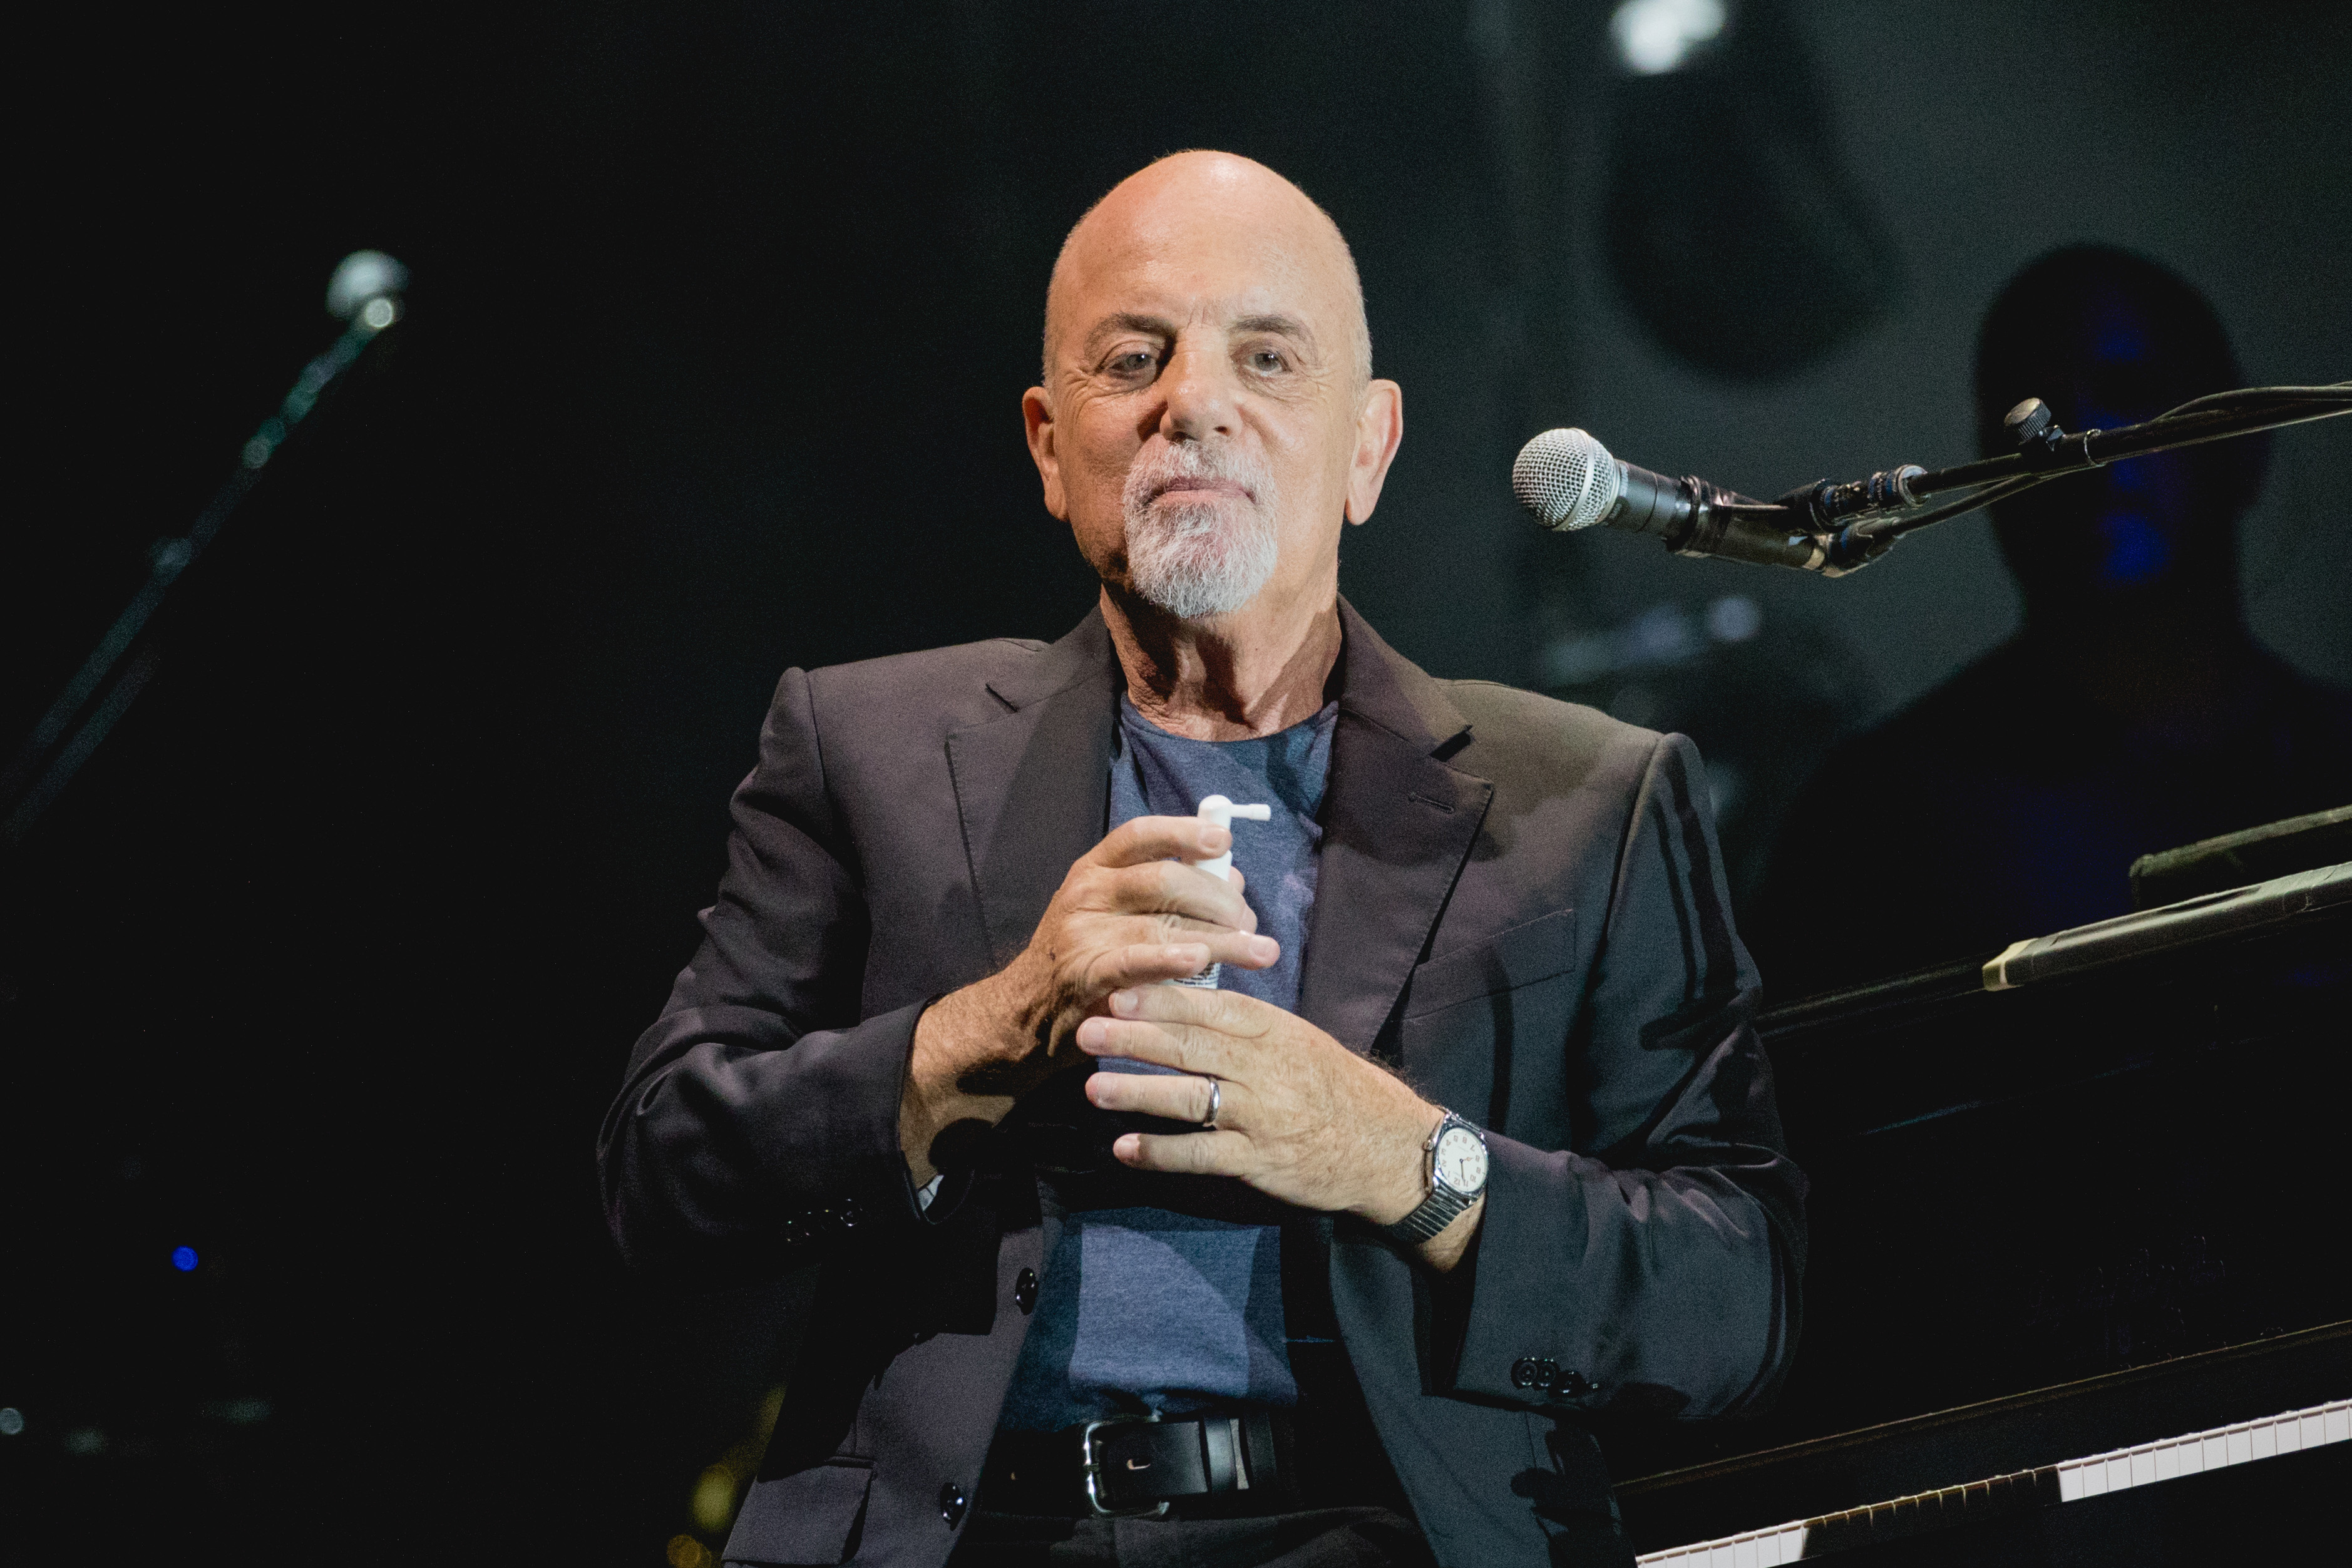 Billy Joel, who owes a $23 million Long Island home, onstage at his concert